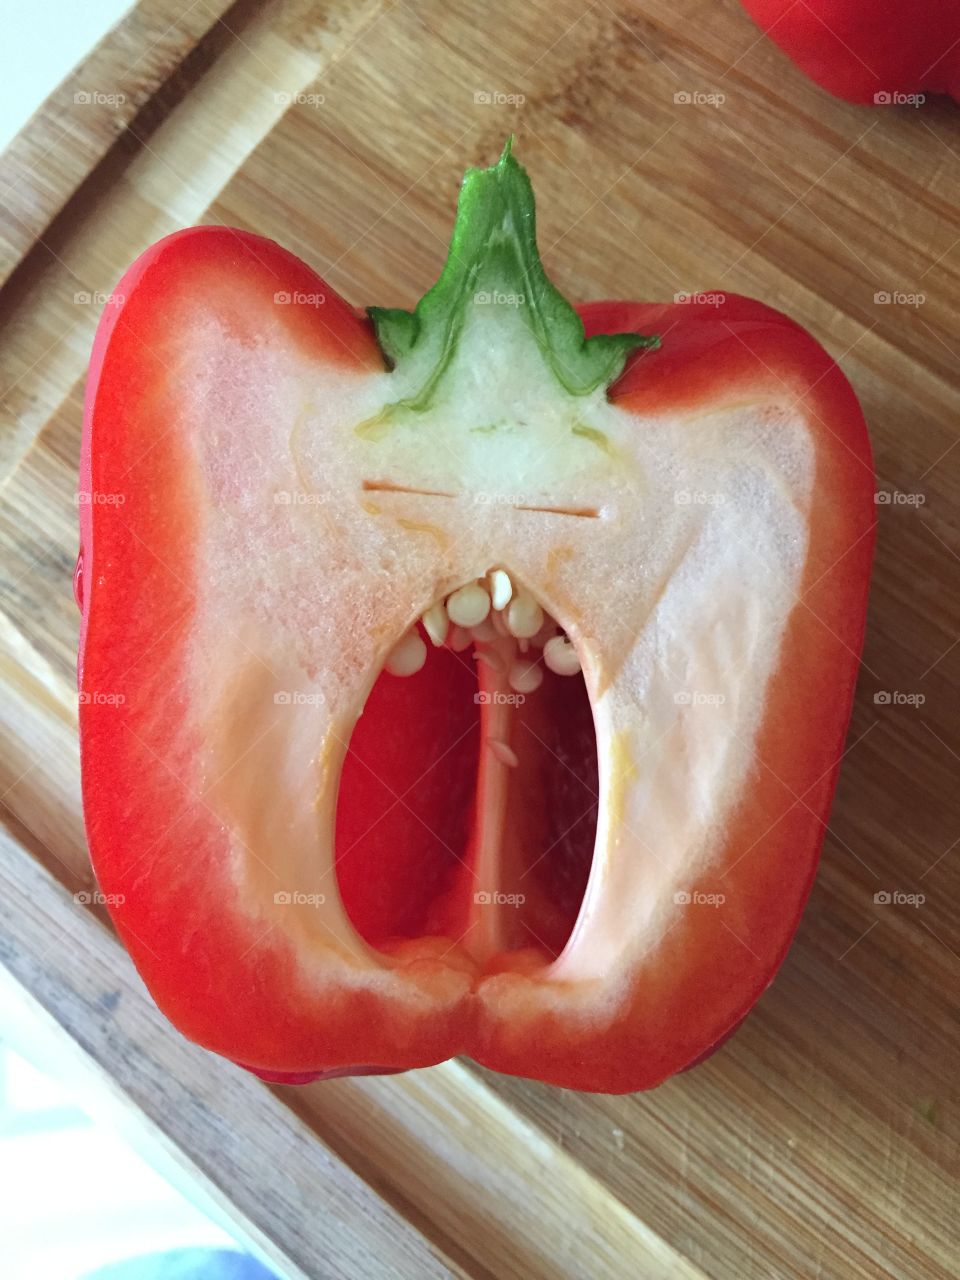 When your pepper is tired